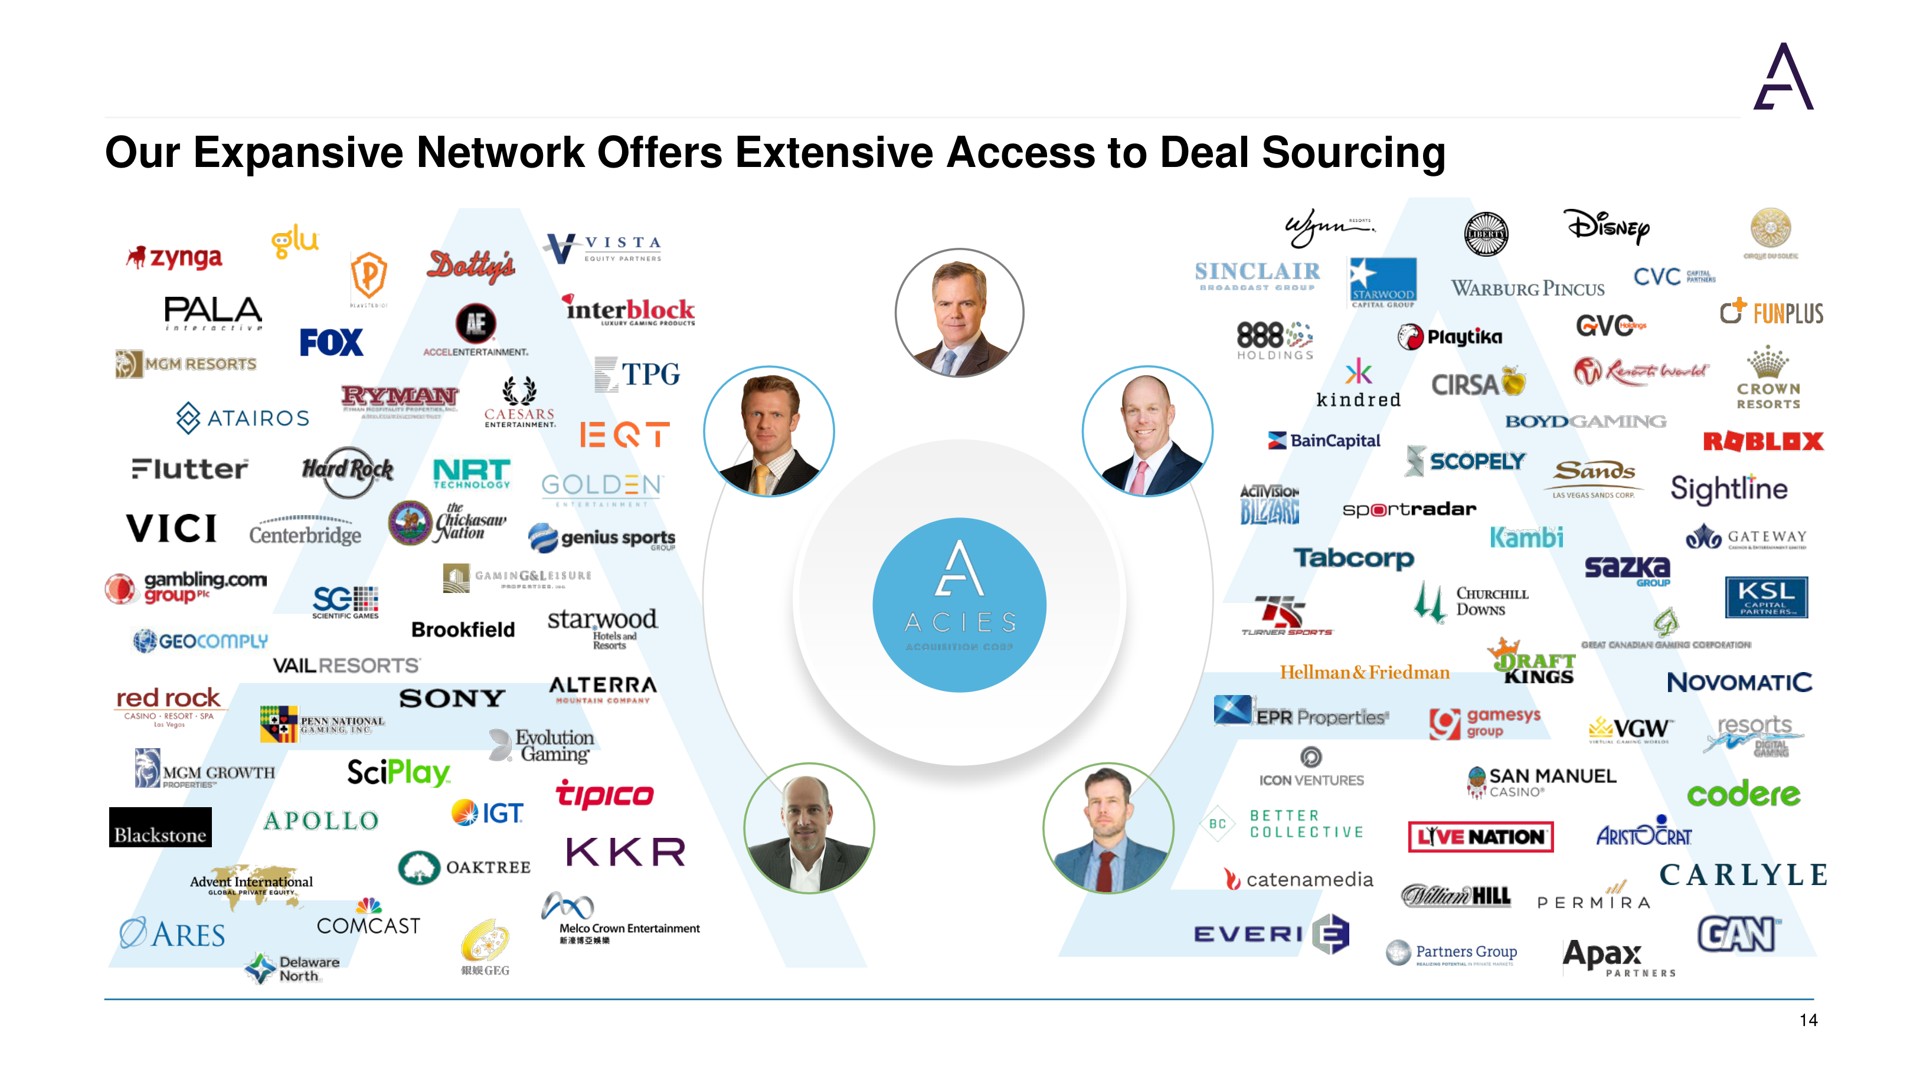 our expansive network offers extensive access to deal sourcing a doves vow goats | Acies